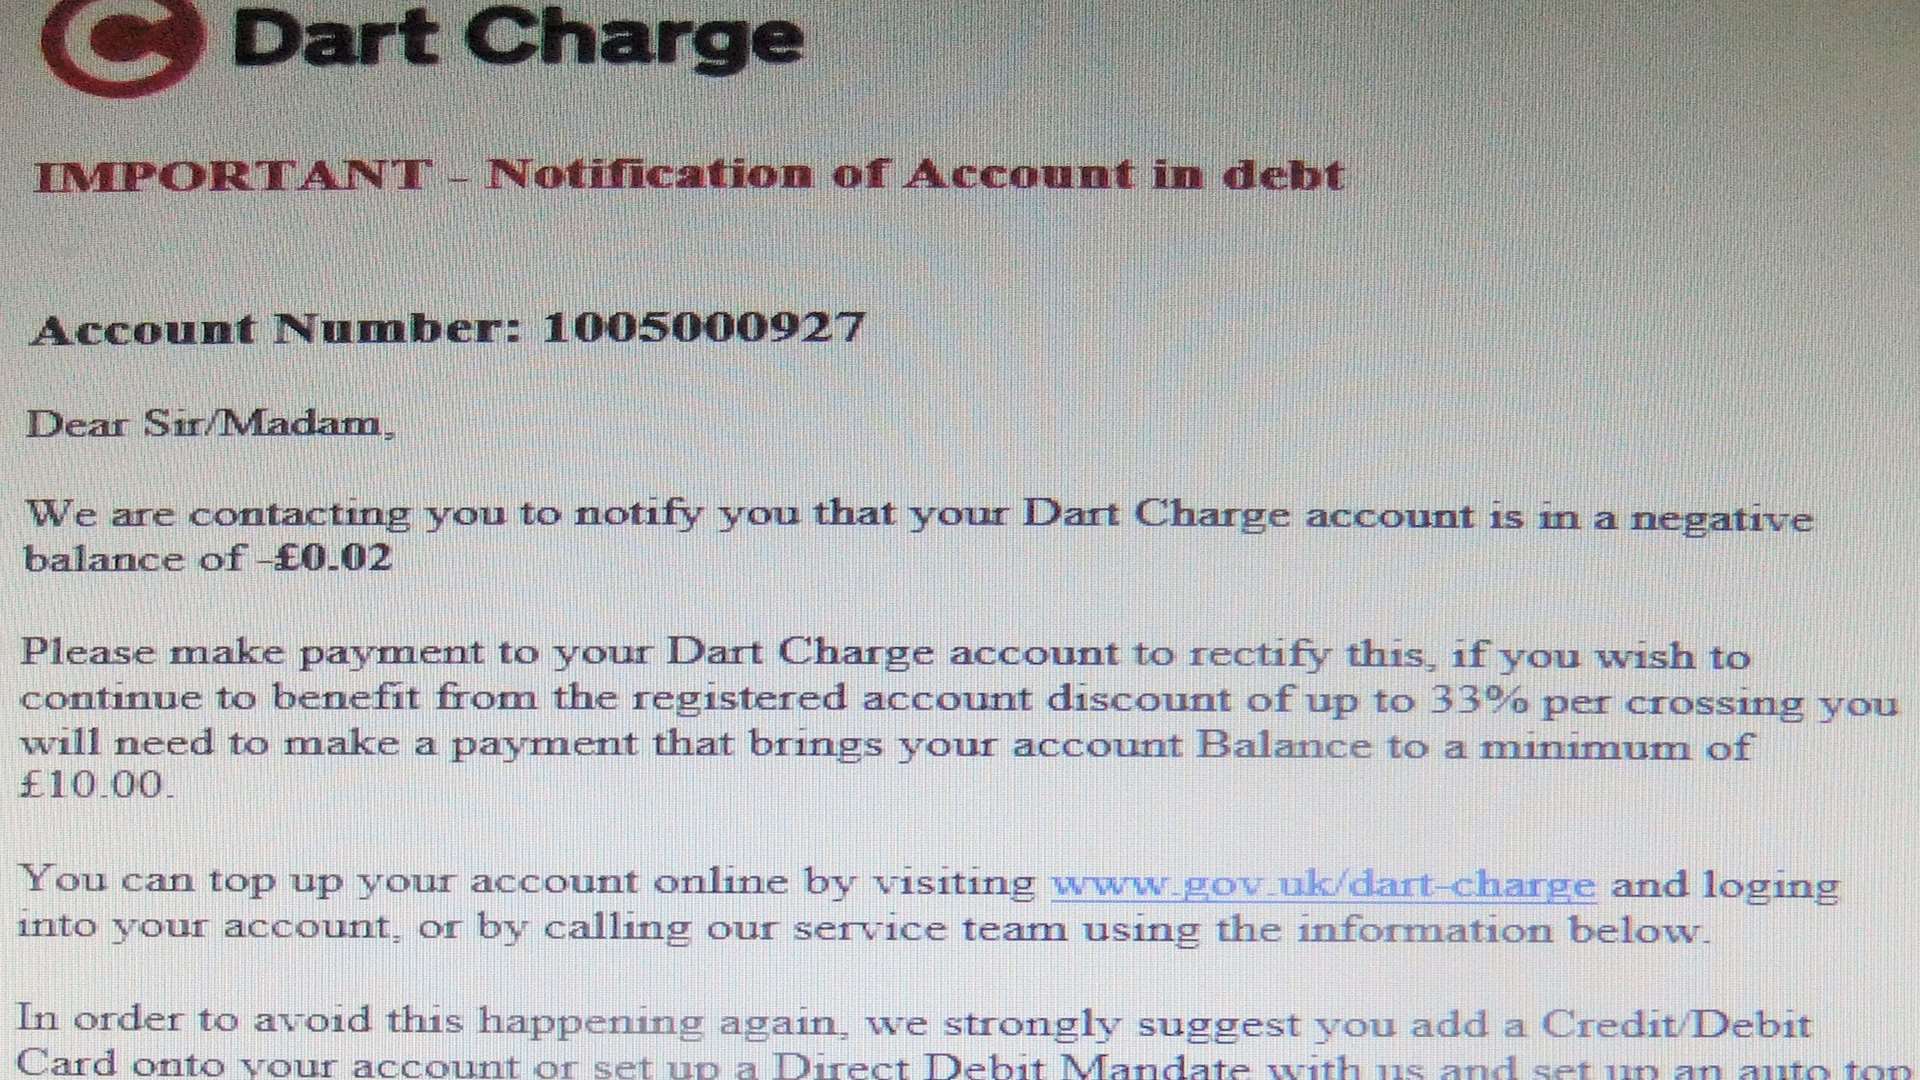 Dart charge Ted Prangnell received asking for 2p